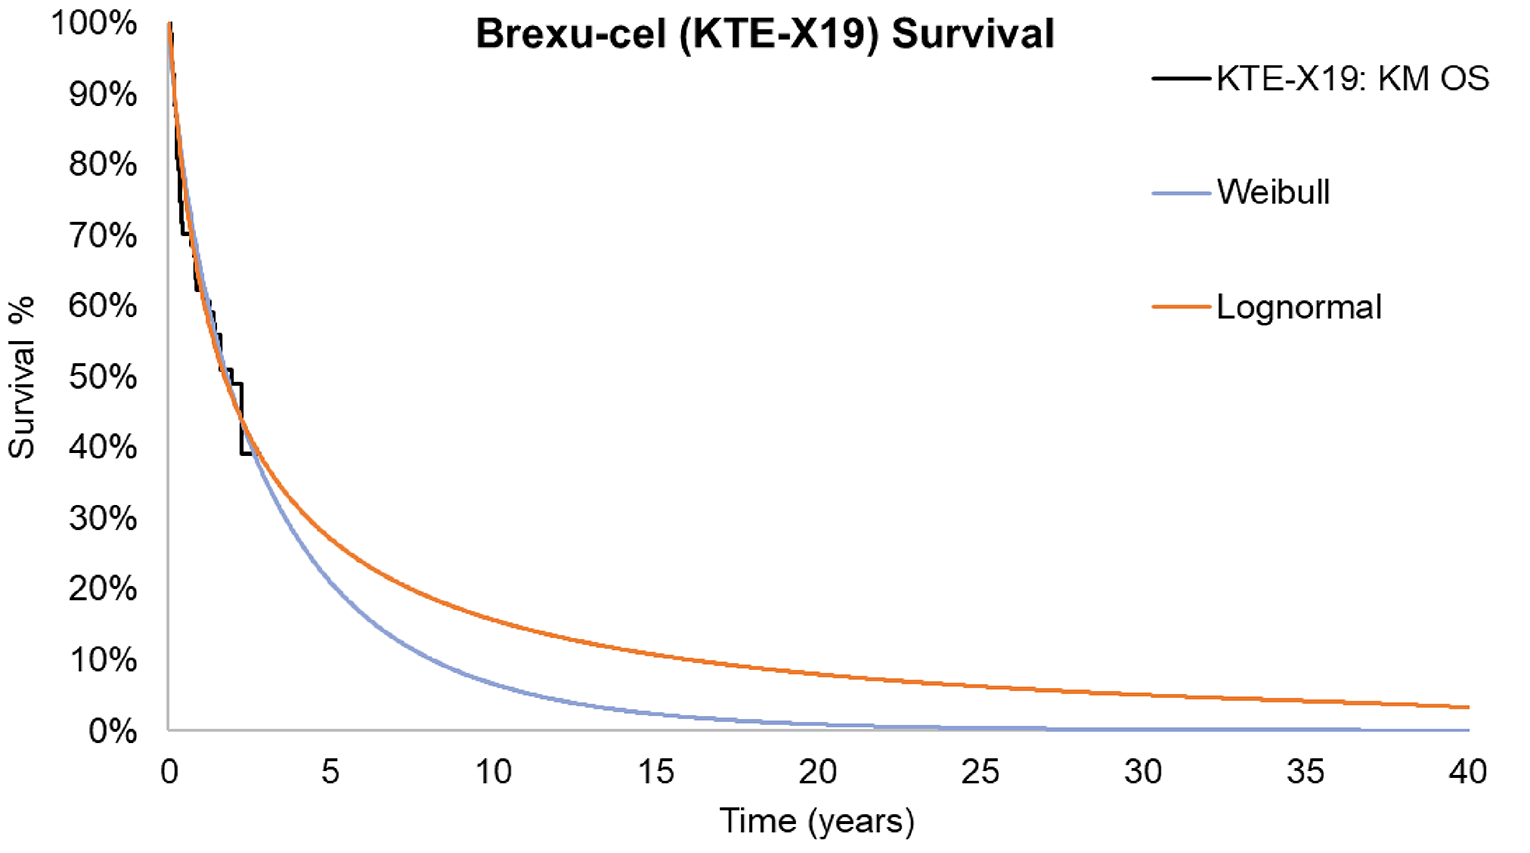 Line graph depicting two alternative overall survival curves for Brexu-cel using the Weibull or Lognormal distribution. The x-axis represents time in years and the y-axis represent the survival percentage. At 20 years the Weibull distribution has approximately 1% survival while the Lognormal distribution has 10% survival.